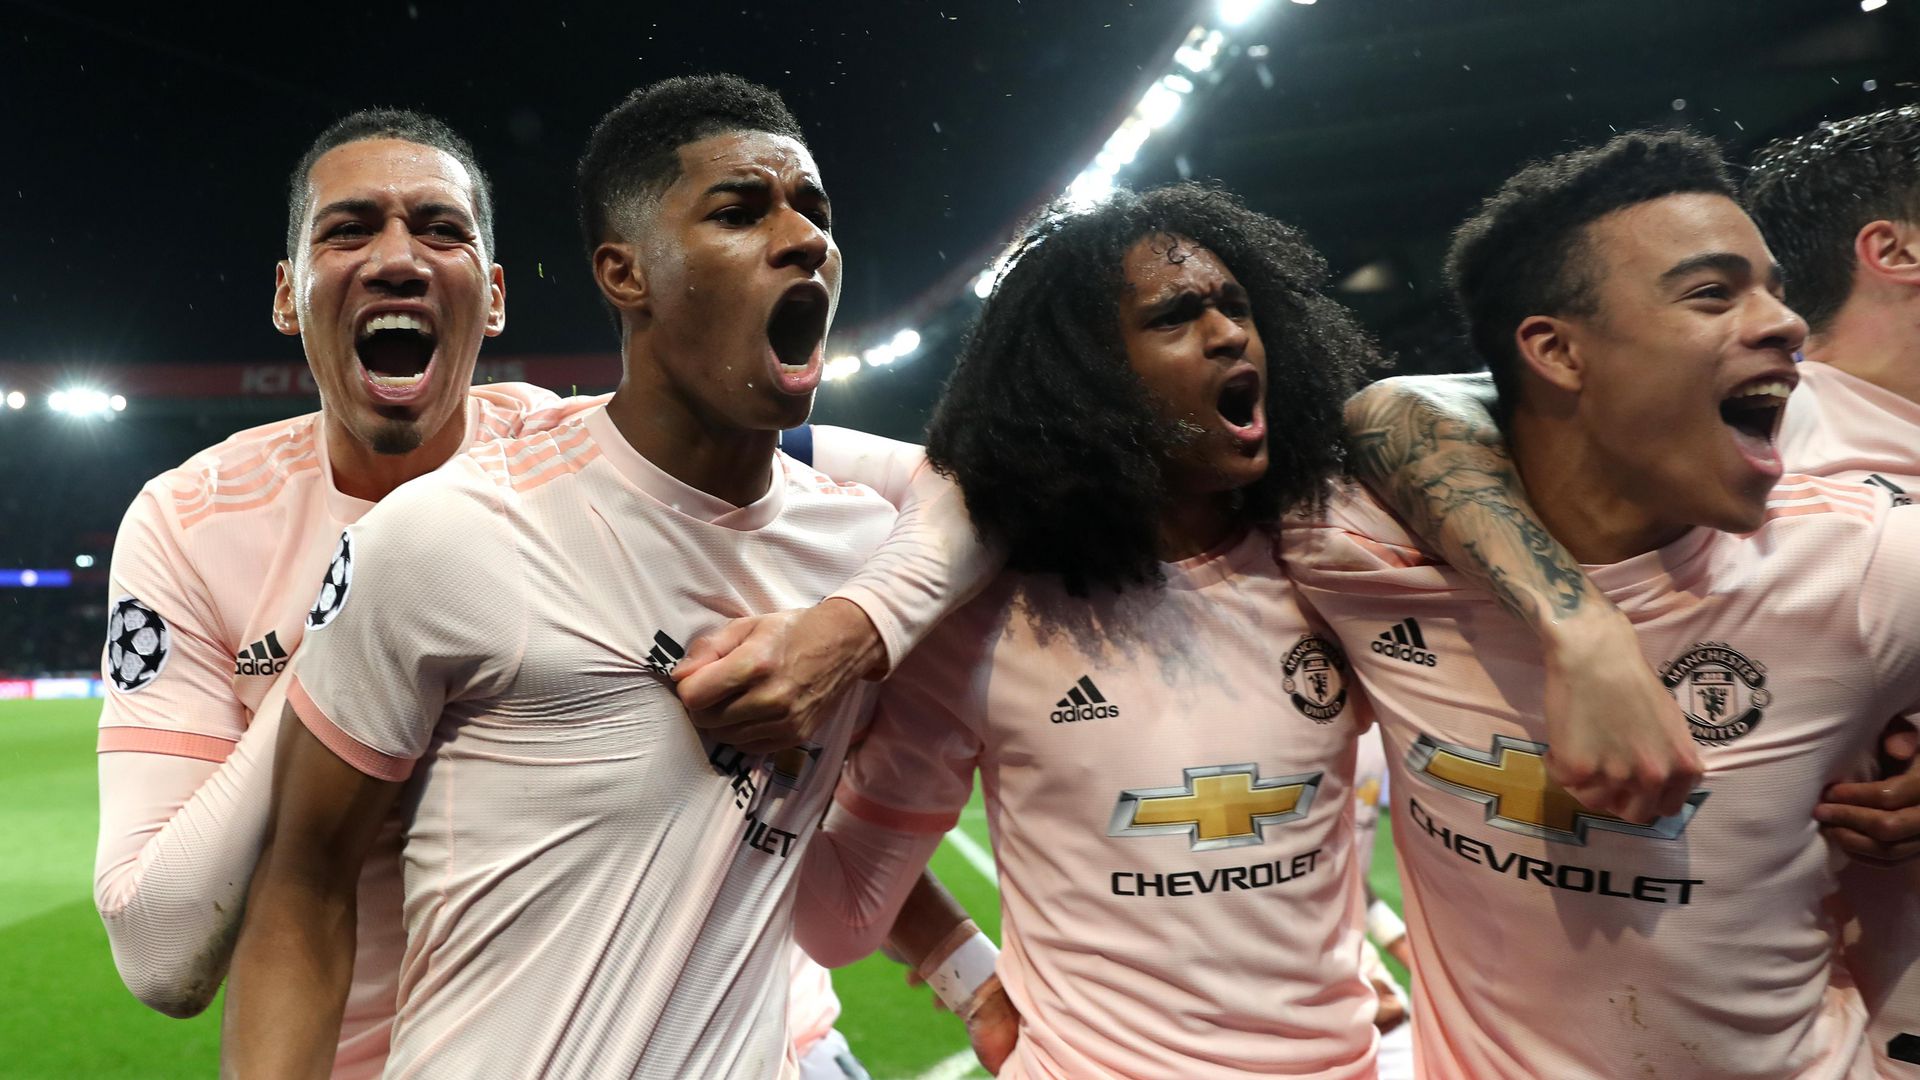 Psg 1 Manchester United 3 Champions League Match Report | Manchester United